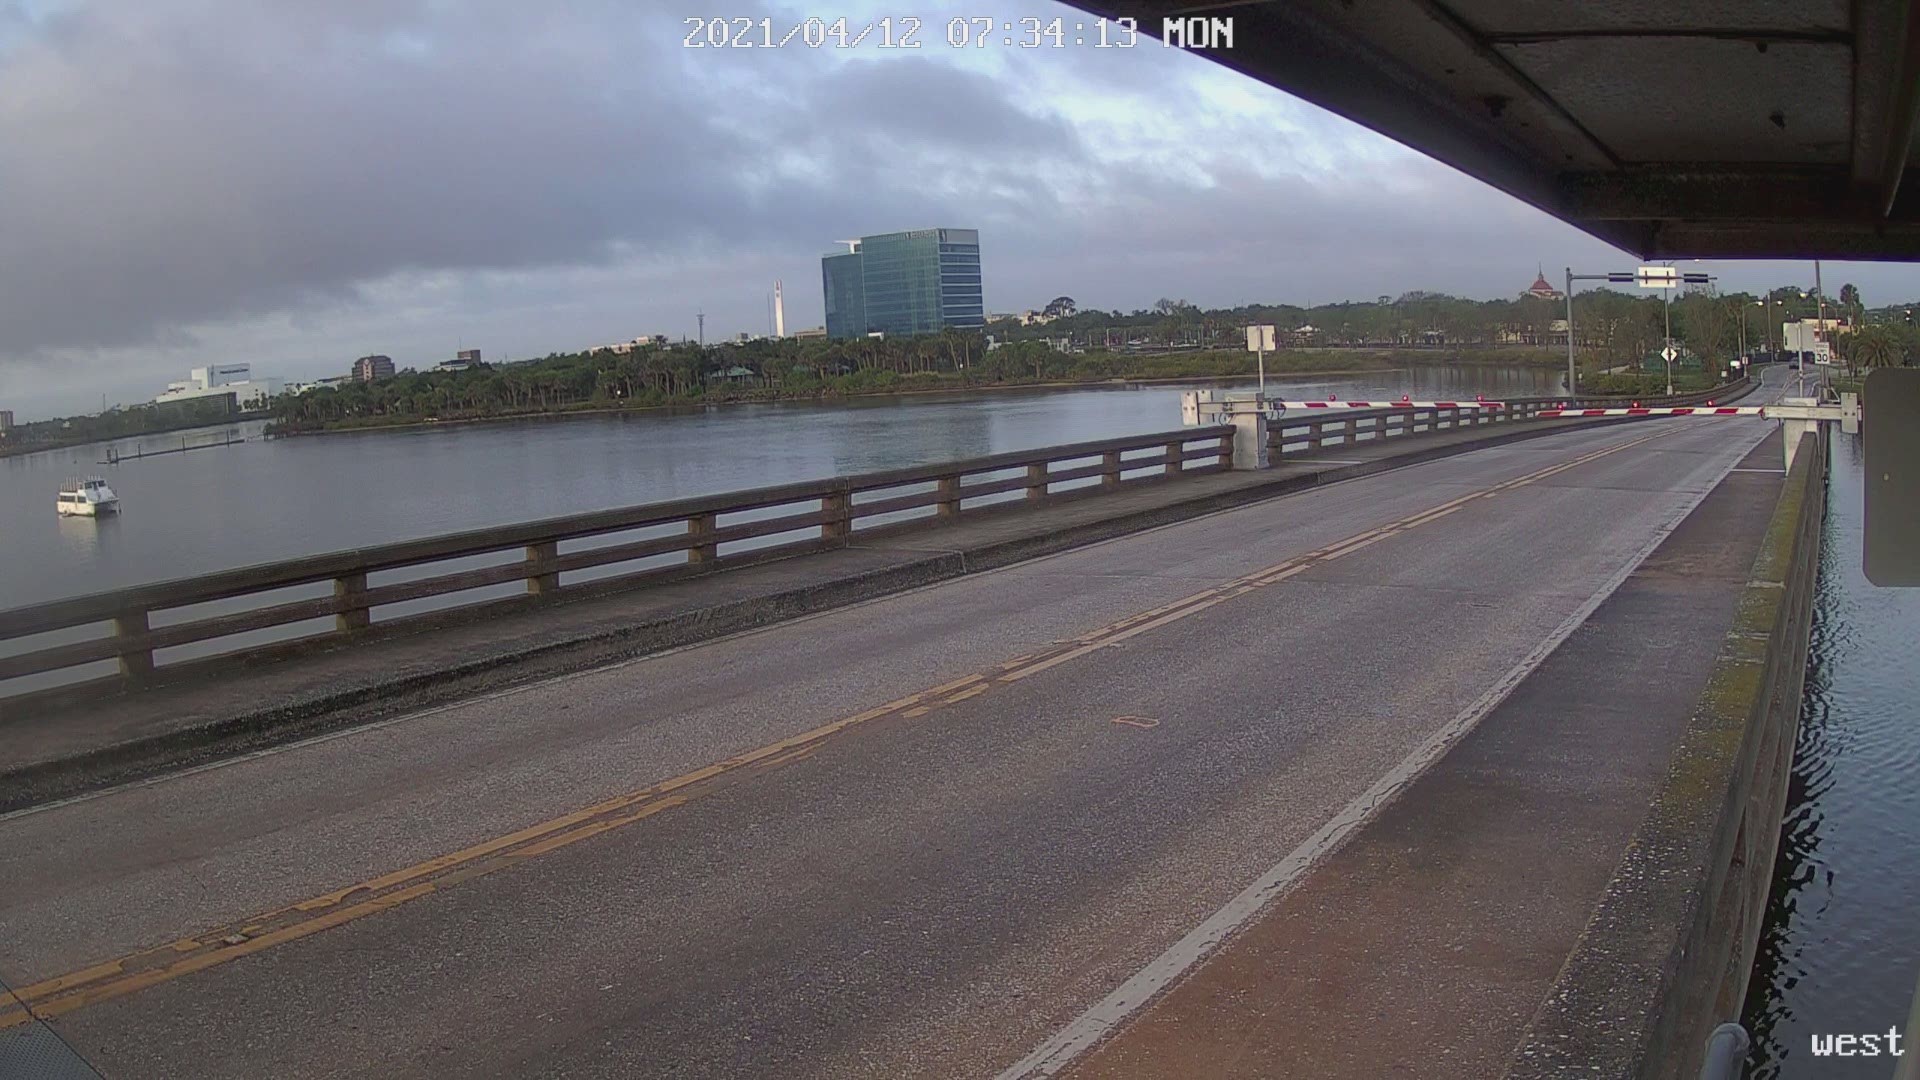 Daytona Beach police officials said the small SUV was spotted Monday around 7:45 a.m. heading east from the mainland toward the beach on the Main Street Bridge.